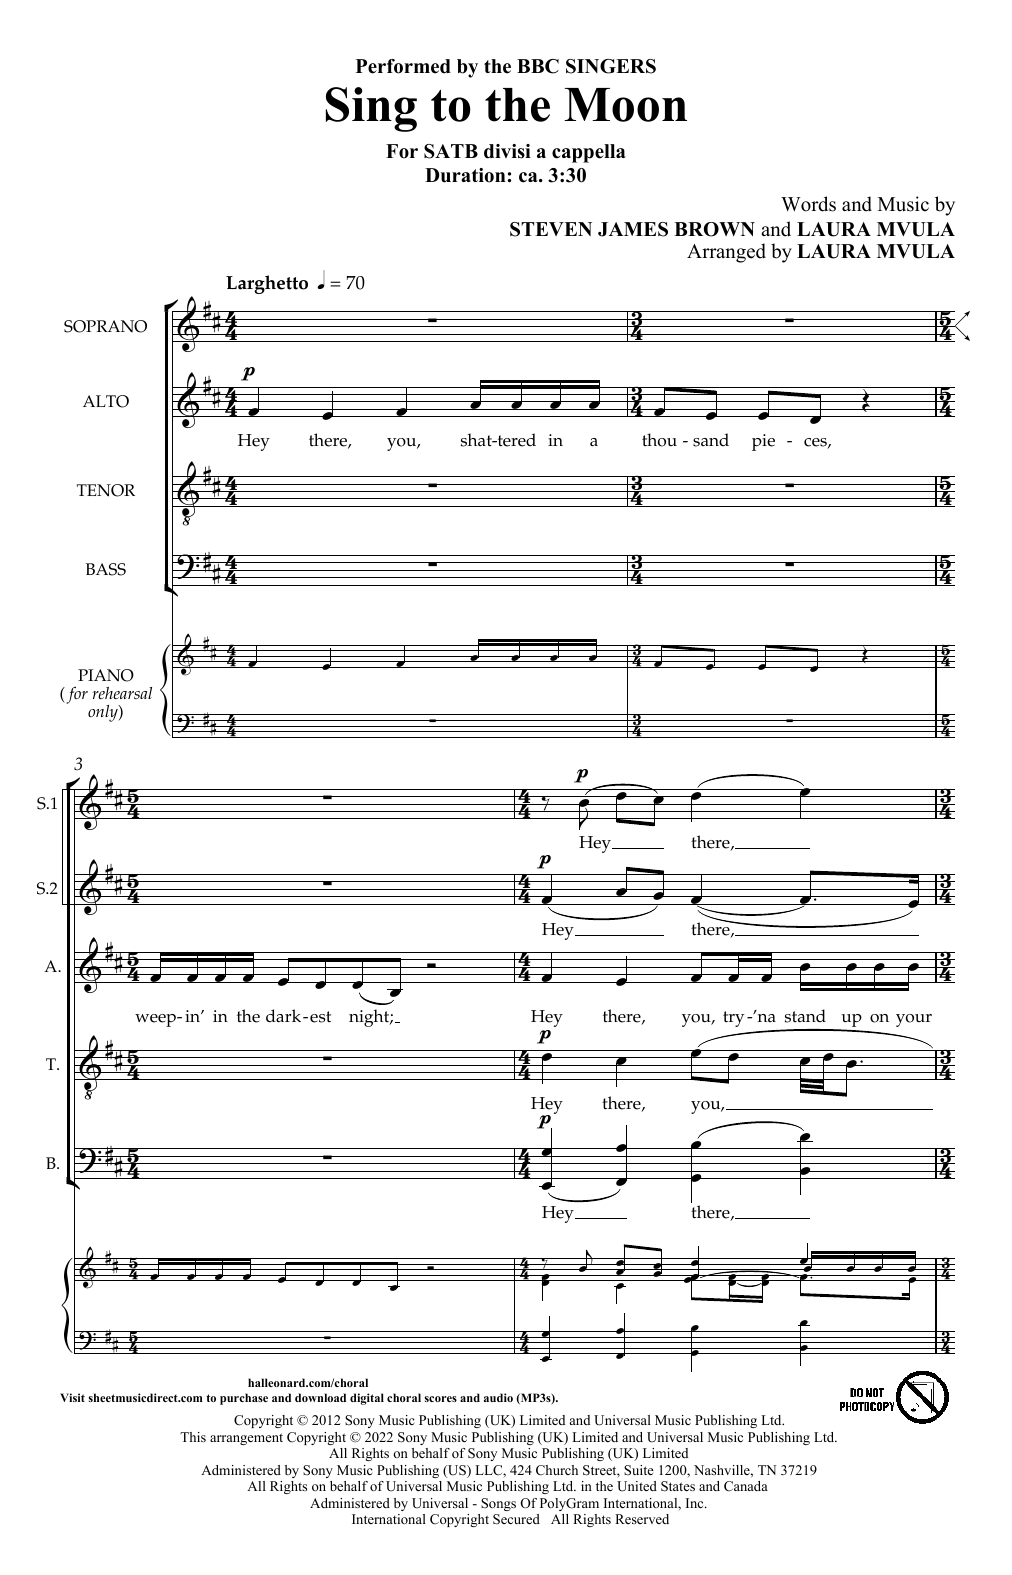 Download BBC Singers Sing To The Moon (arr. Laura Mvula) Sheet Music